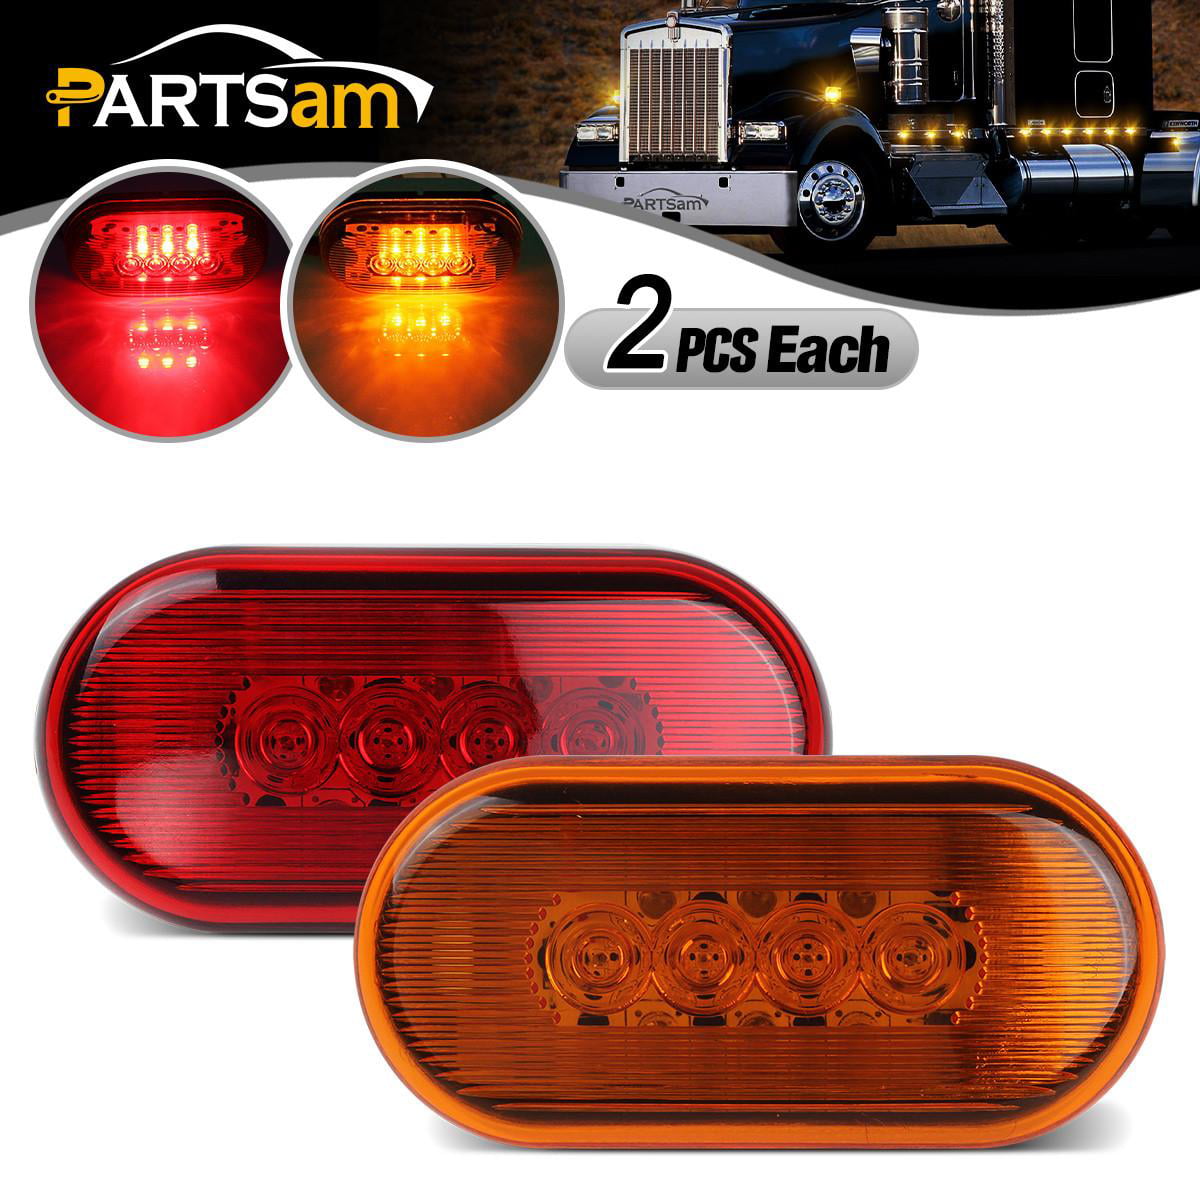 Size: 2.53 x 1.06 x 0.71 inch Partsam 2 pcs LED Light 2 Diode Clear/Amber Universal Mount Clearance Side Marker Trailer 